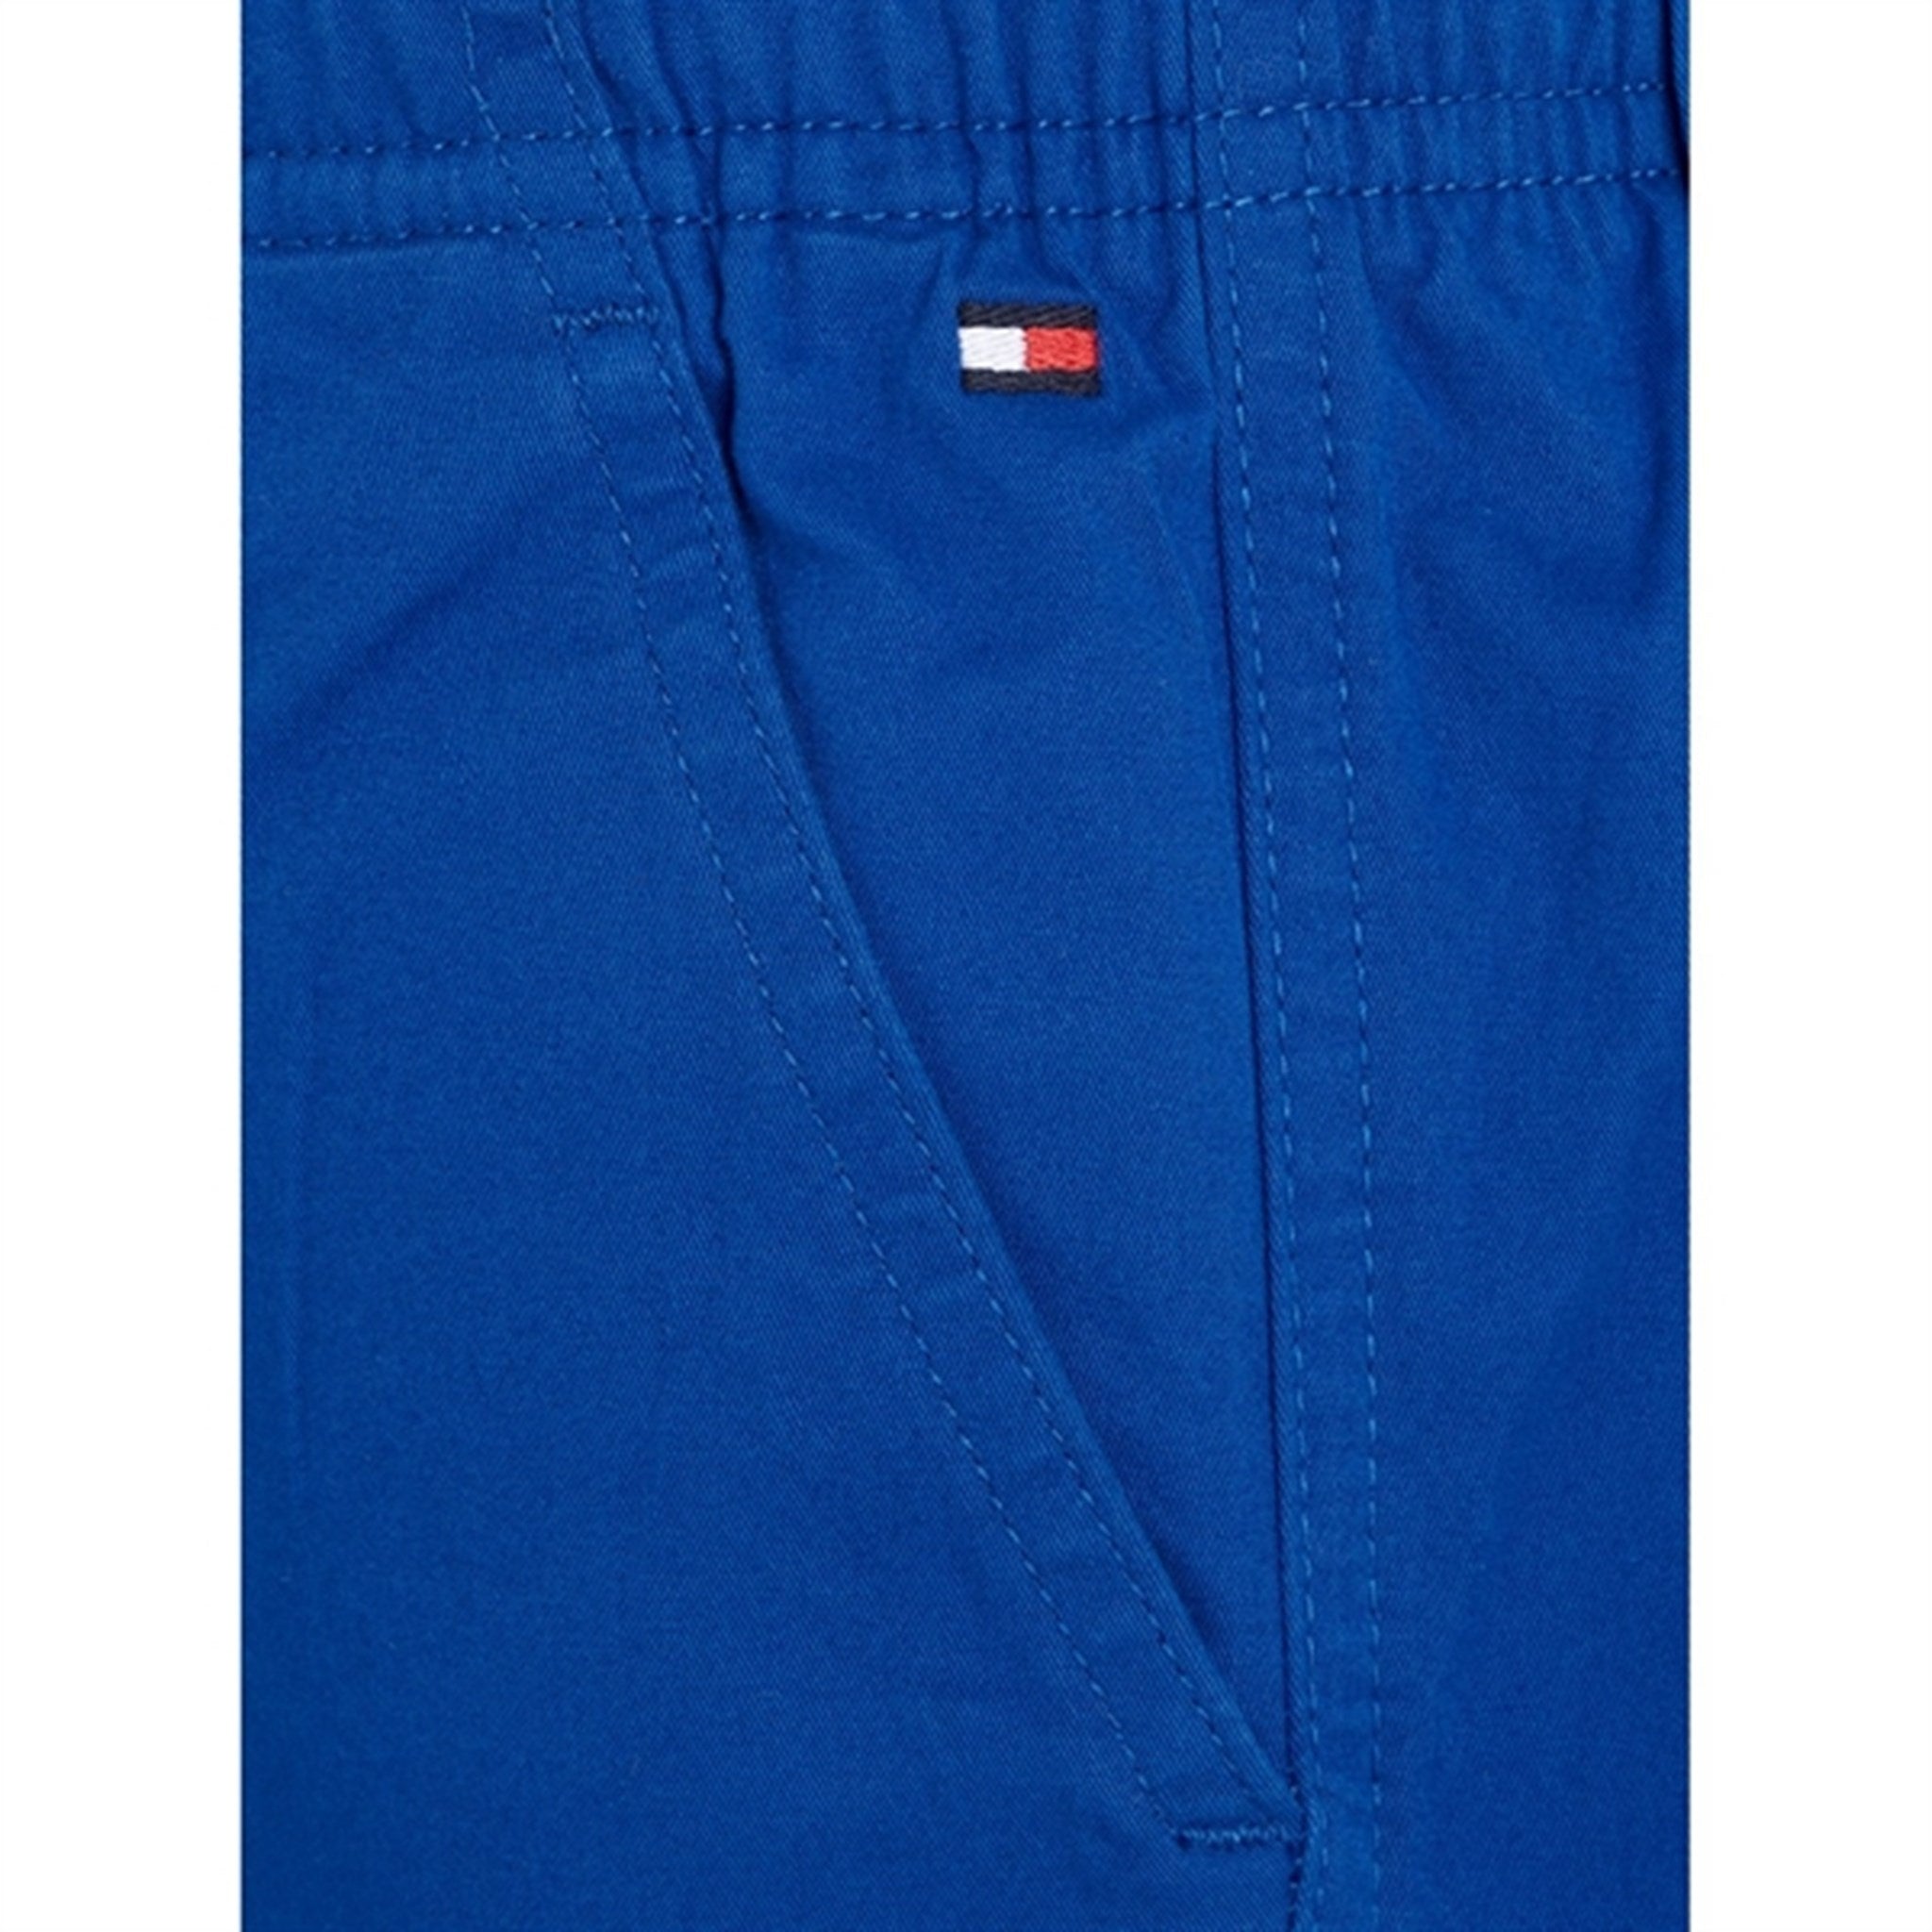 Tommy Hilfiger Skater Pull On Woven Pants Ultra Blue 5